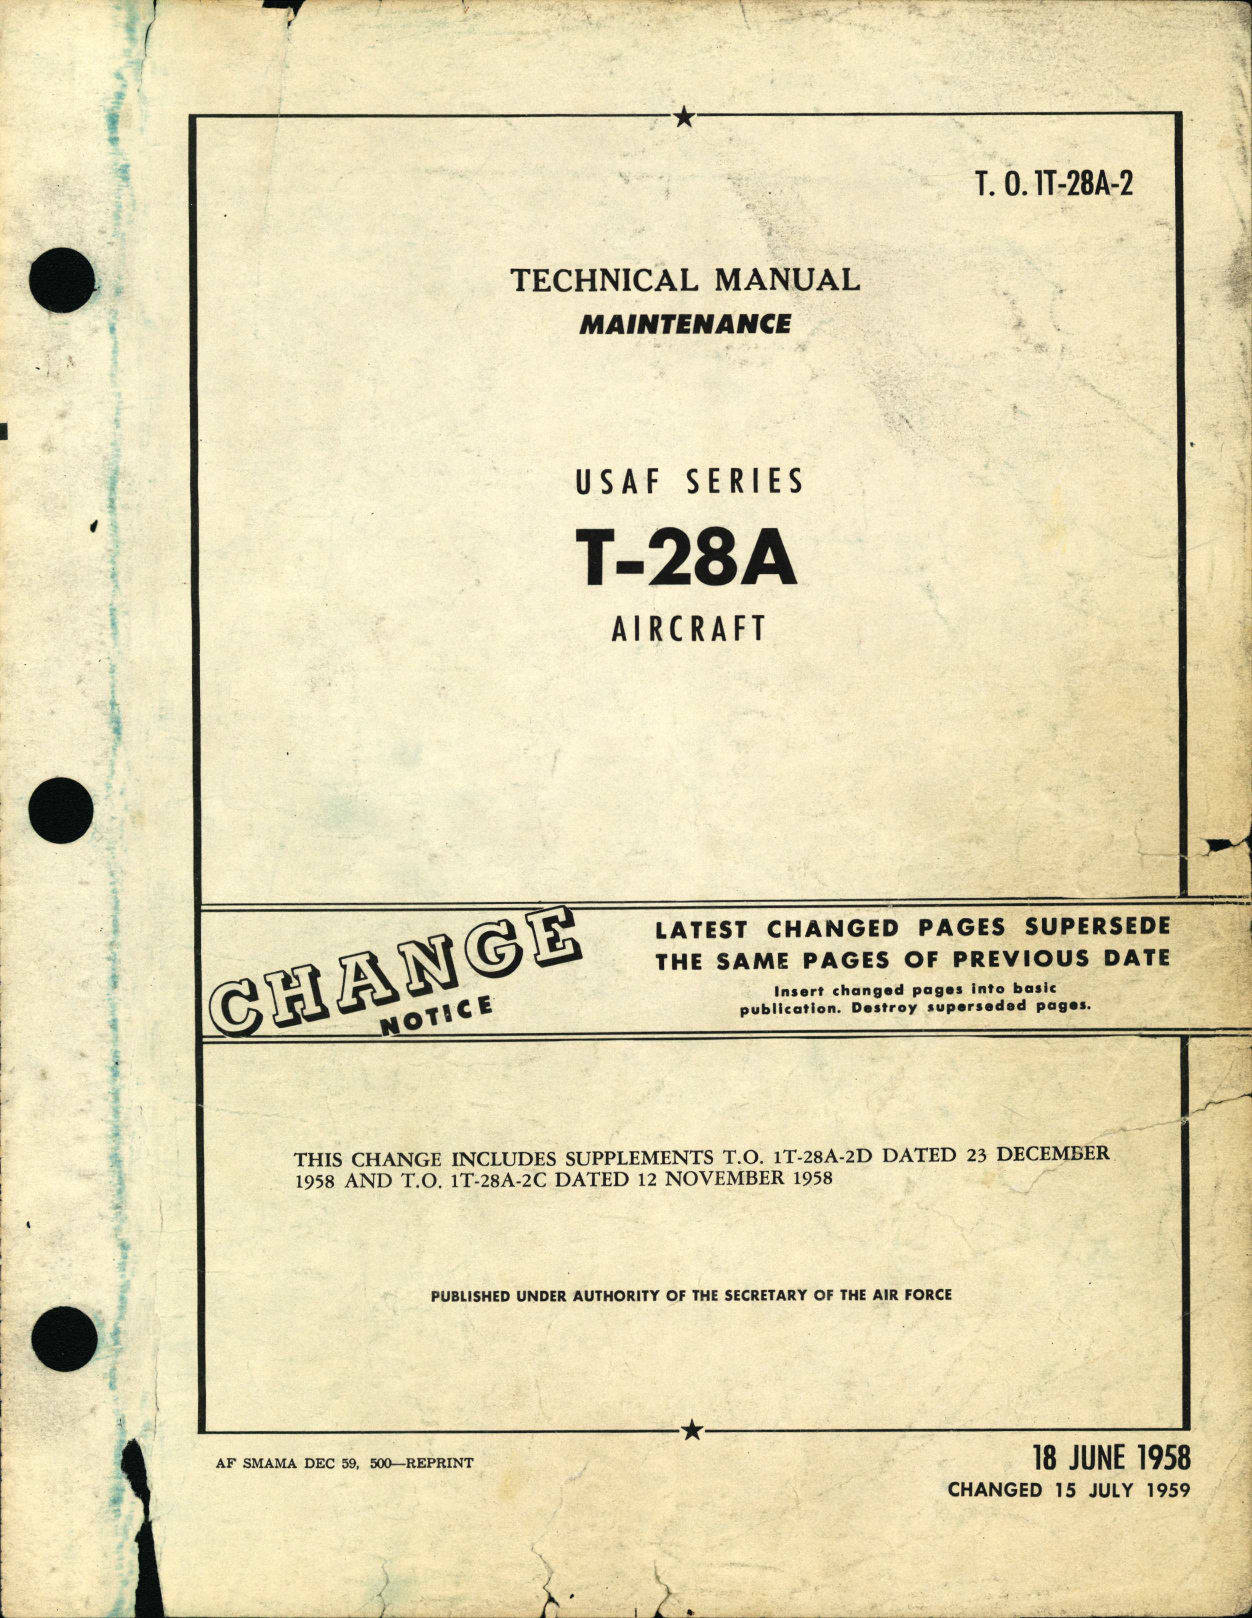 Sample page 1 from AirCorps Library document: Maintenance Manual for T-28A